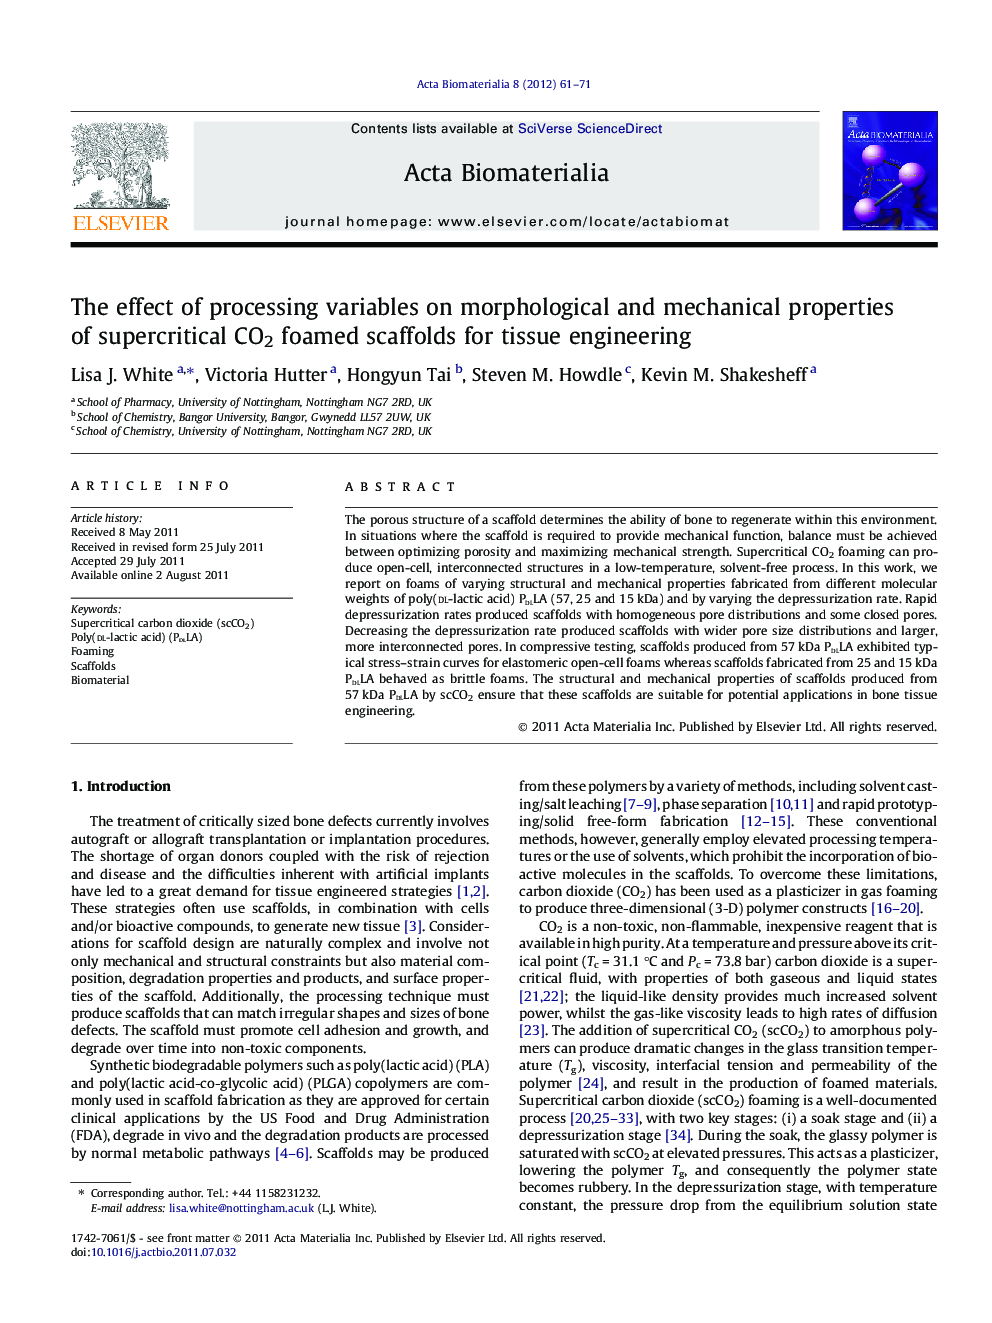 The effect of processing variables on morphological and mechanical properties of supercritical CO2 foamed scaffolds for tissue engineering